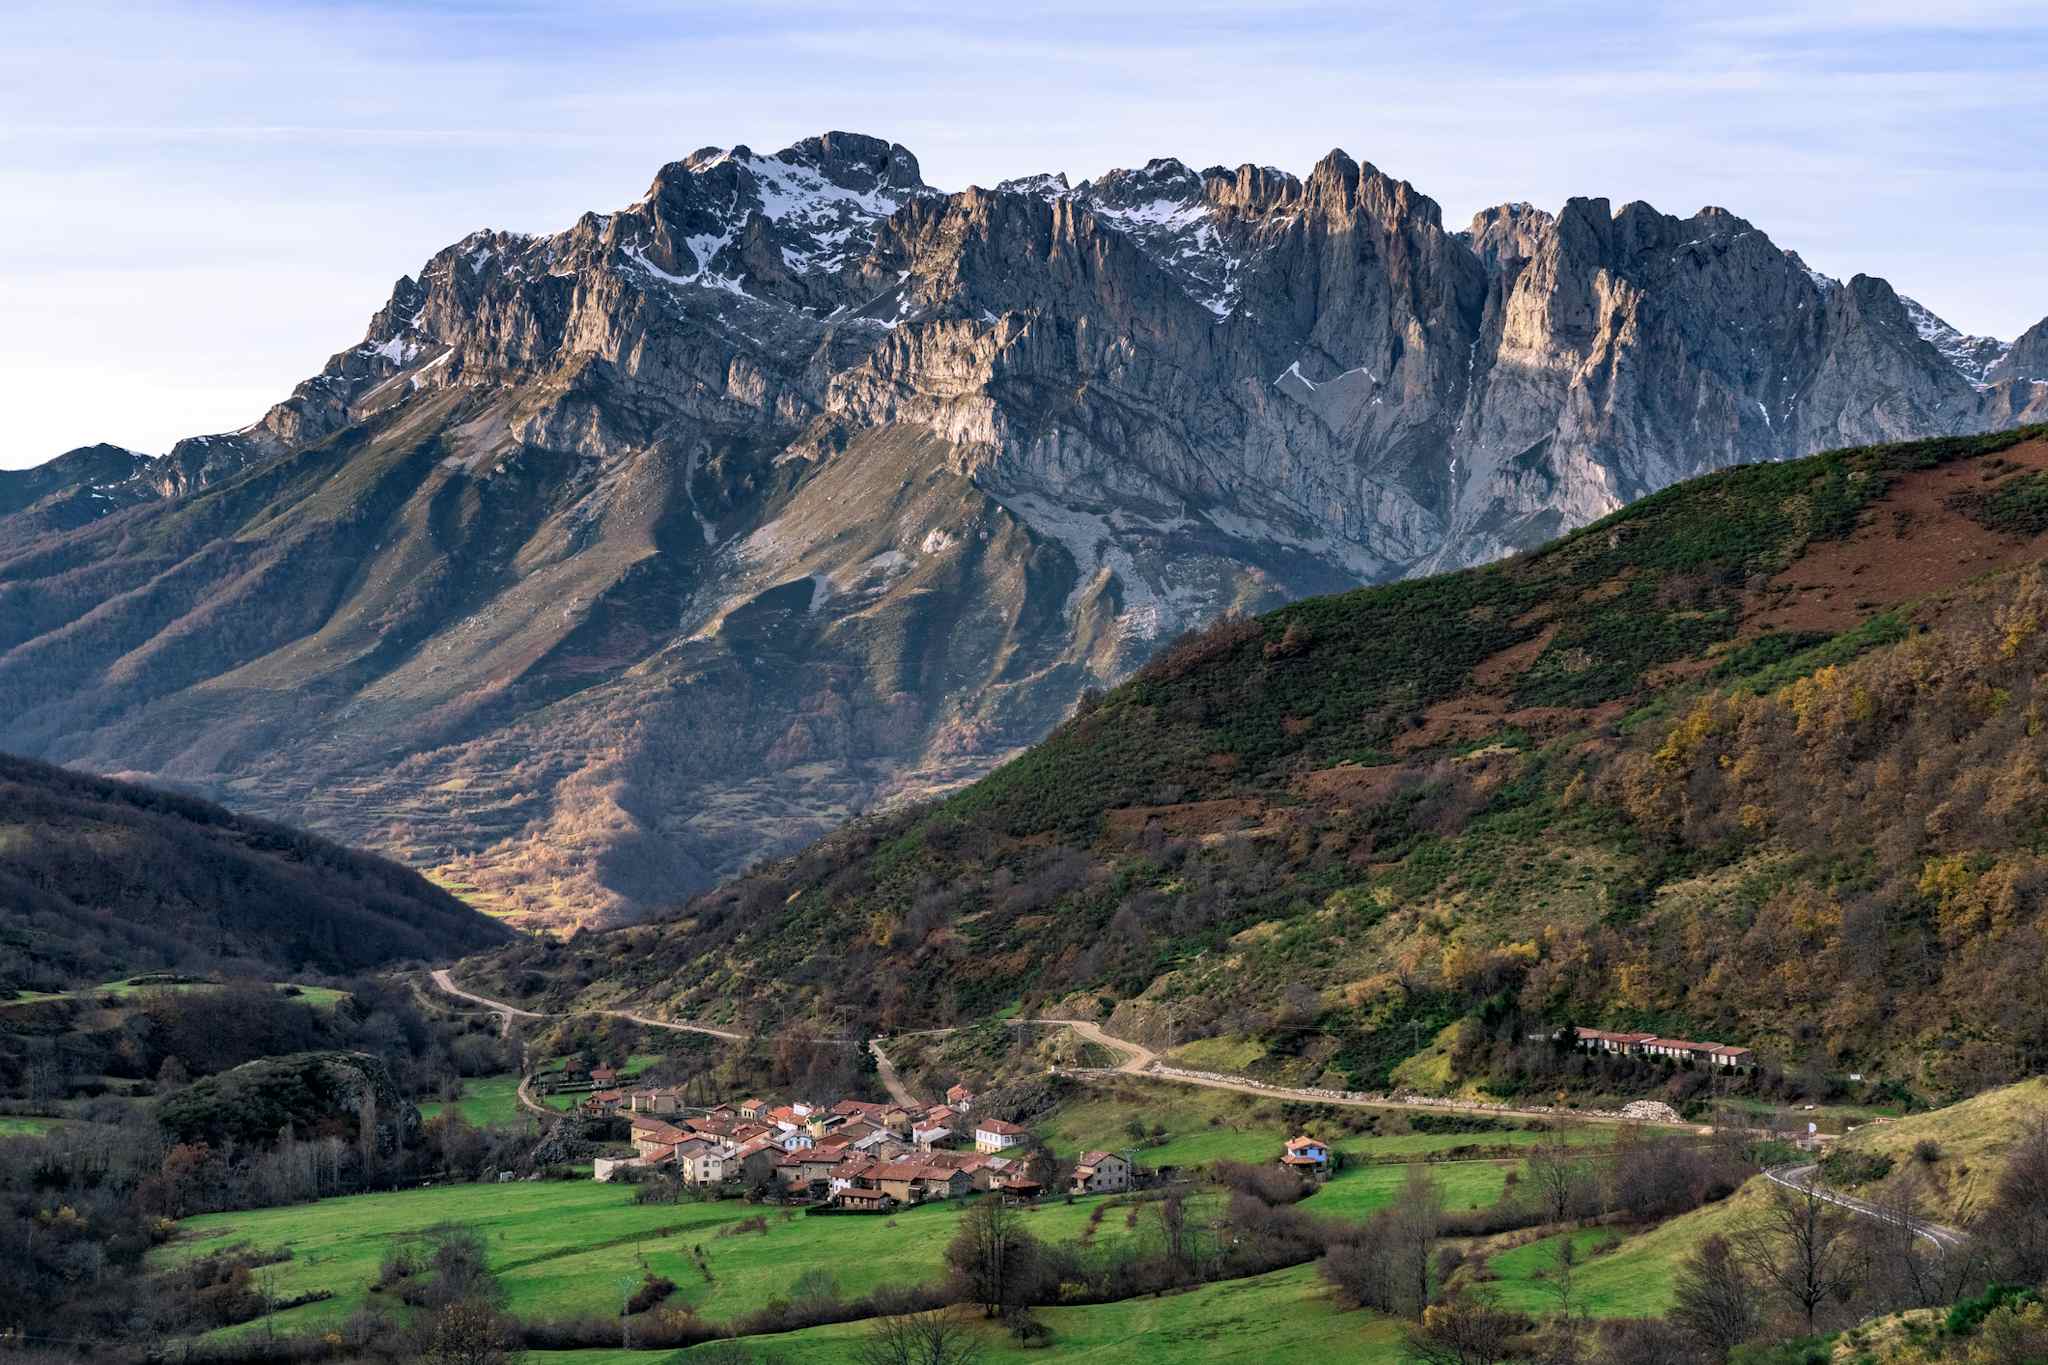 Picos de Europa, Spain
GETTY - Western massif of the Picos de Europa National park and the village of Santa Marina placed in the Valdeon valley at sunrise, Leon, Spain. Photo: Getty # 1557607794
